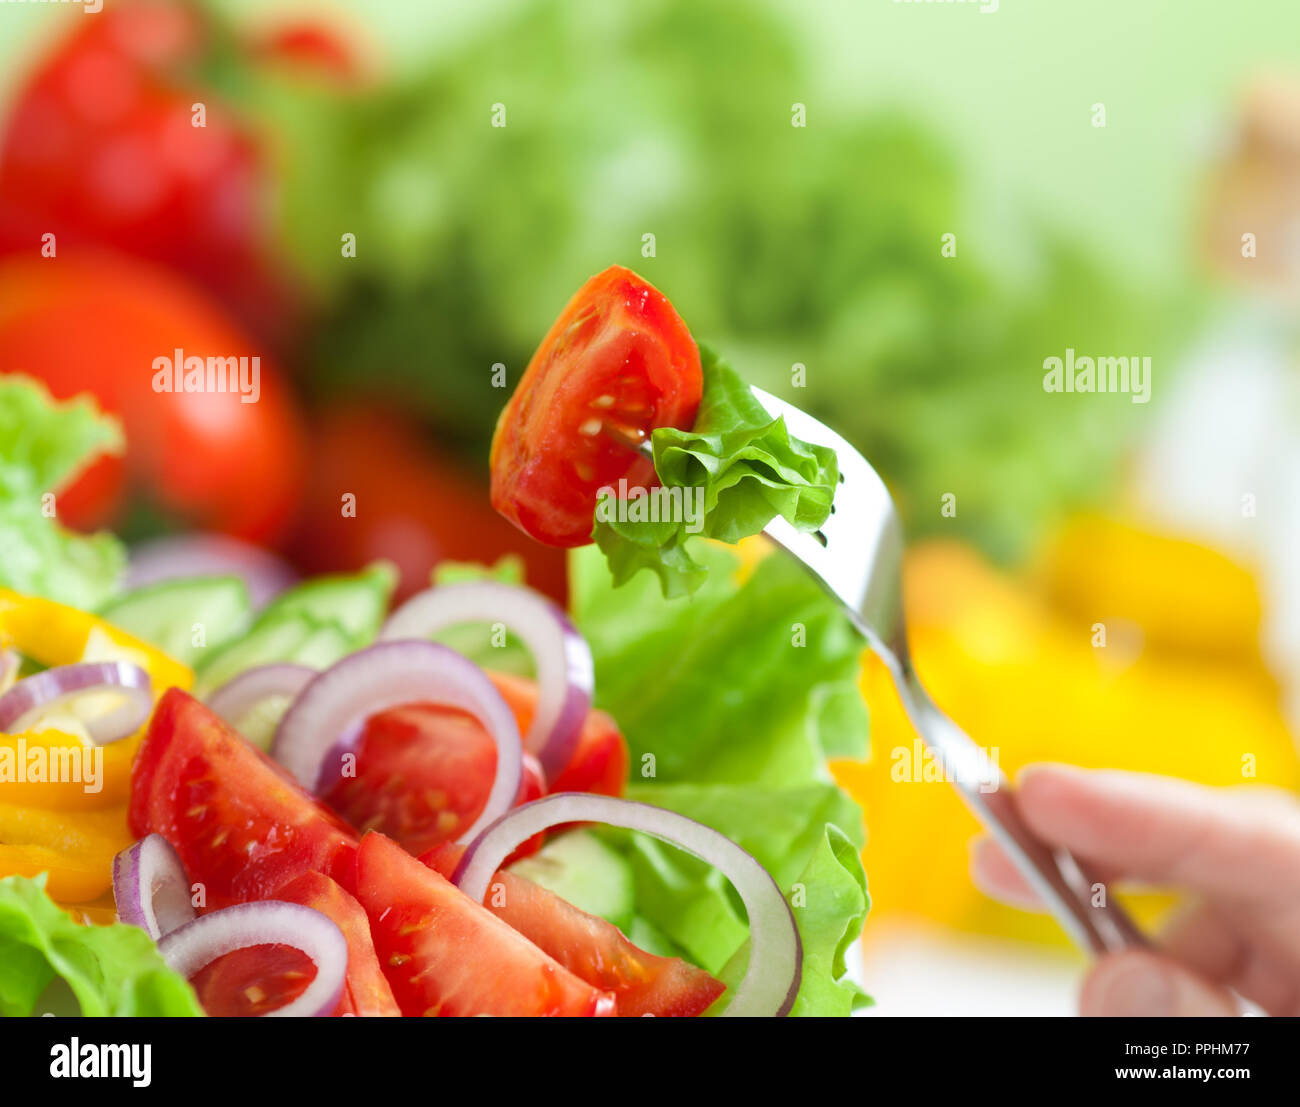 Healthy food or fresh vegetable salad meal concept Stock Photo